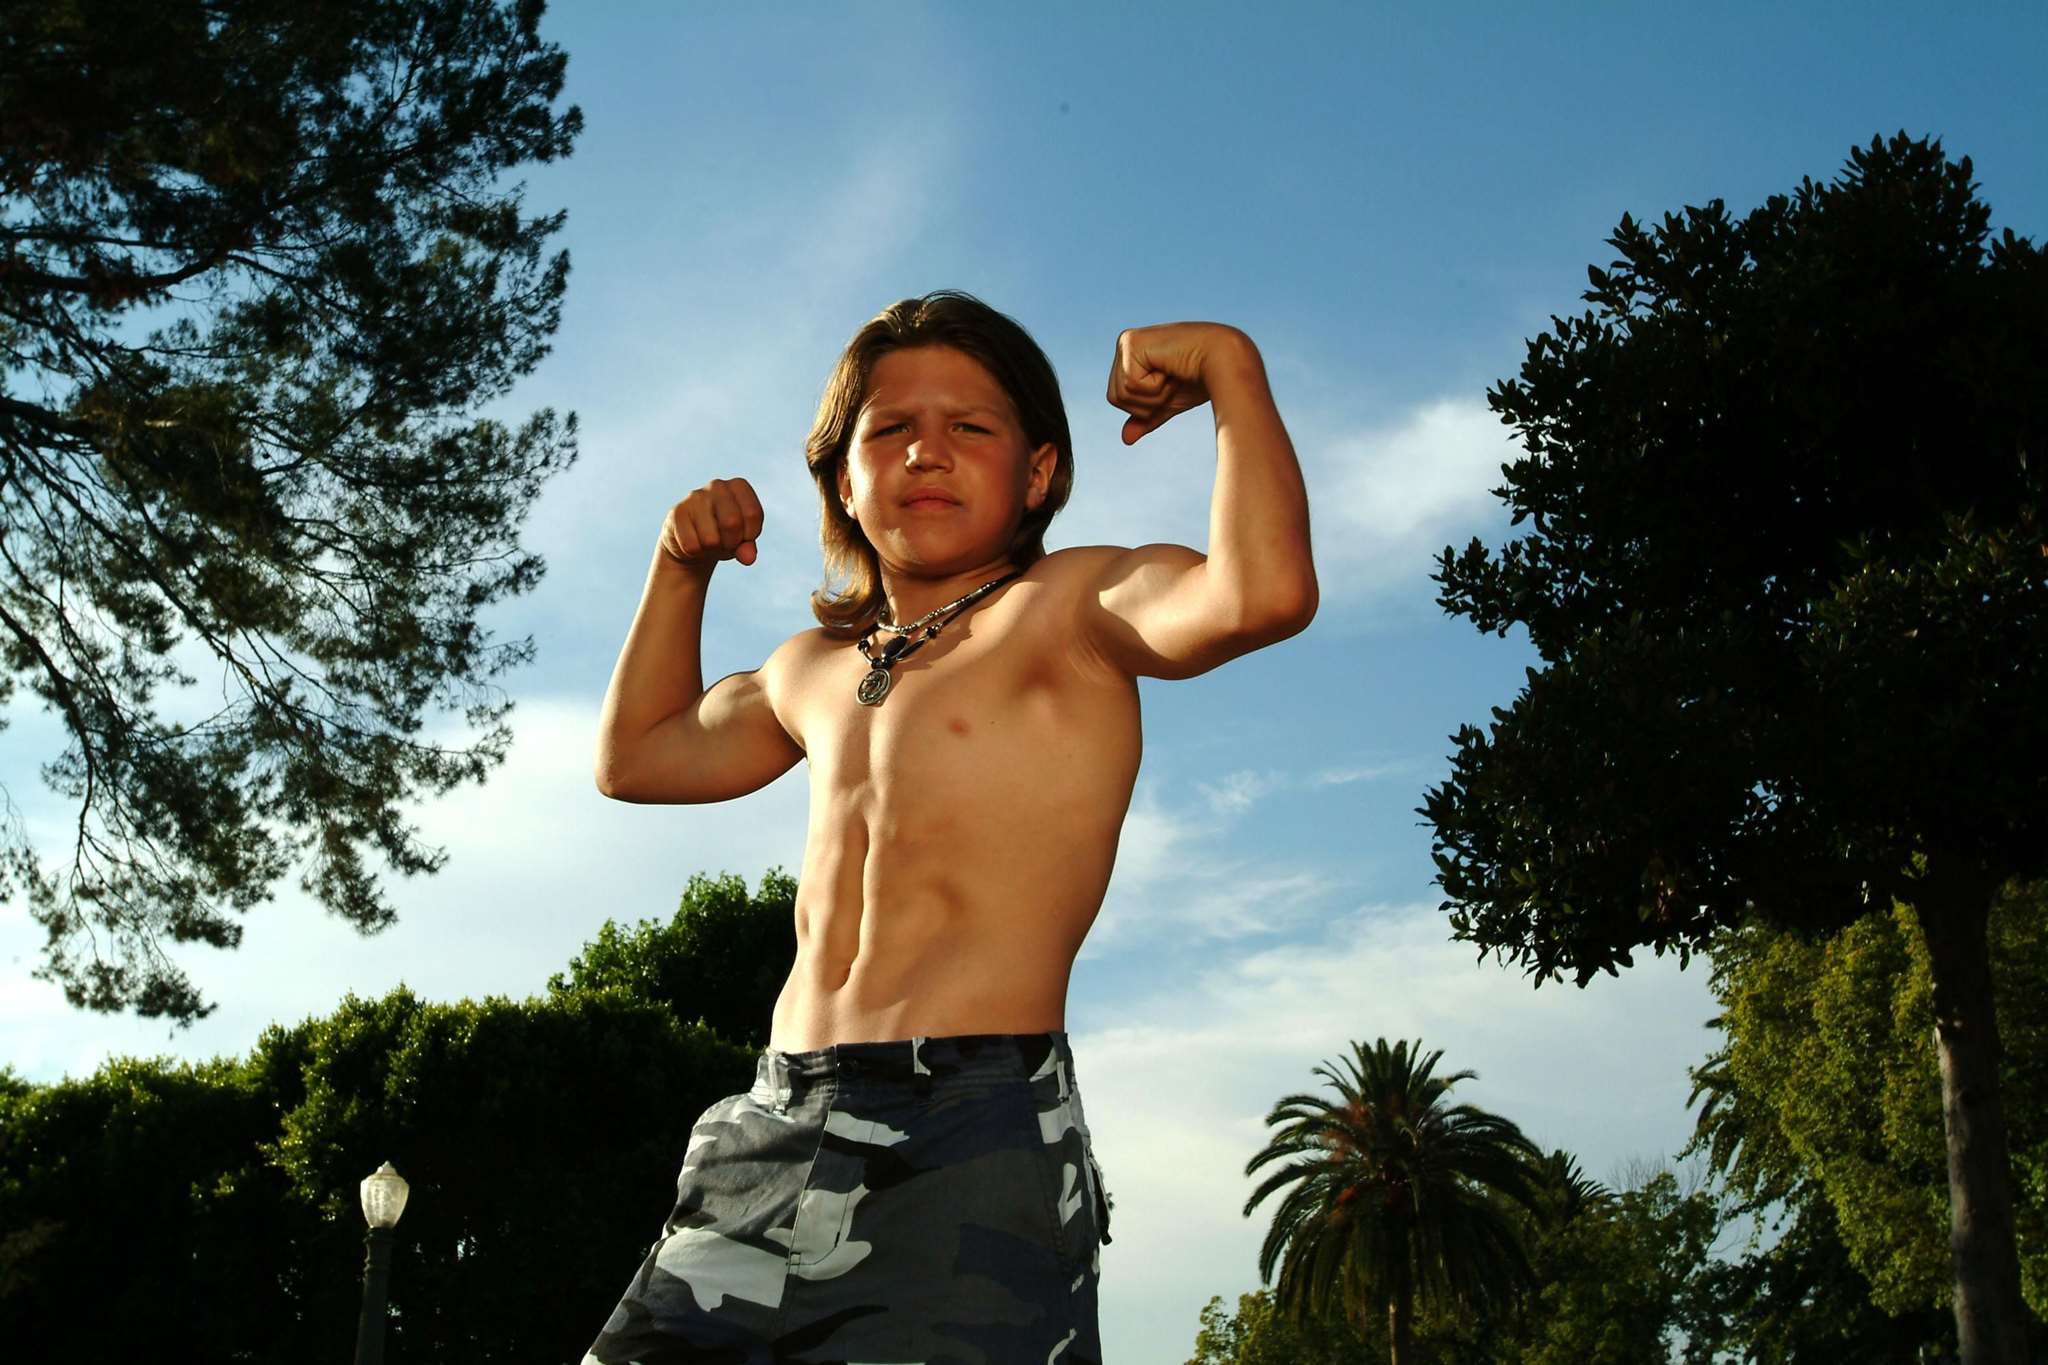 The “Little Hercules” Richard Sandrak Has a Very Different Life Now